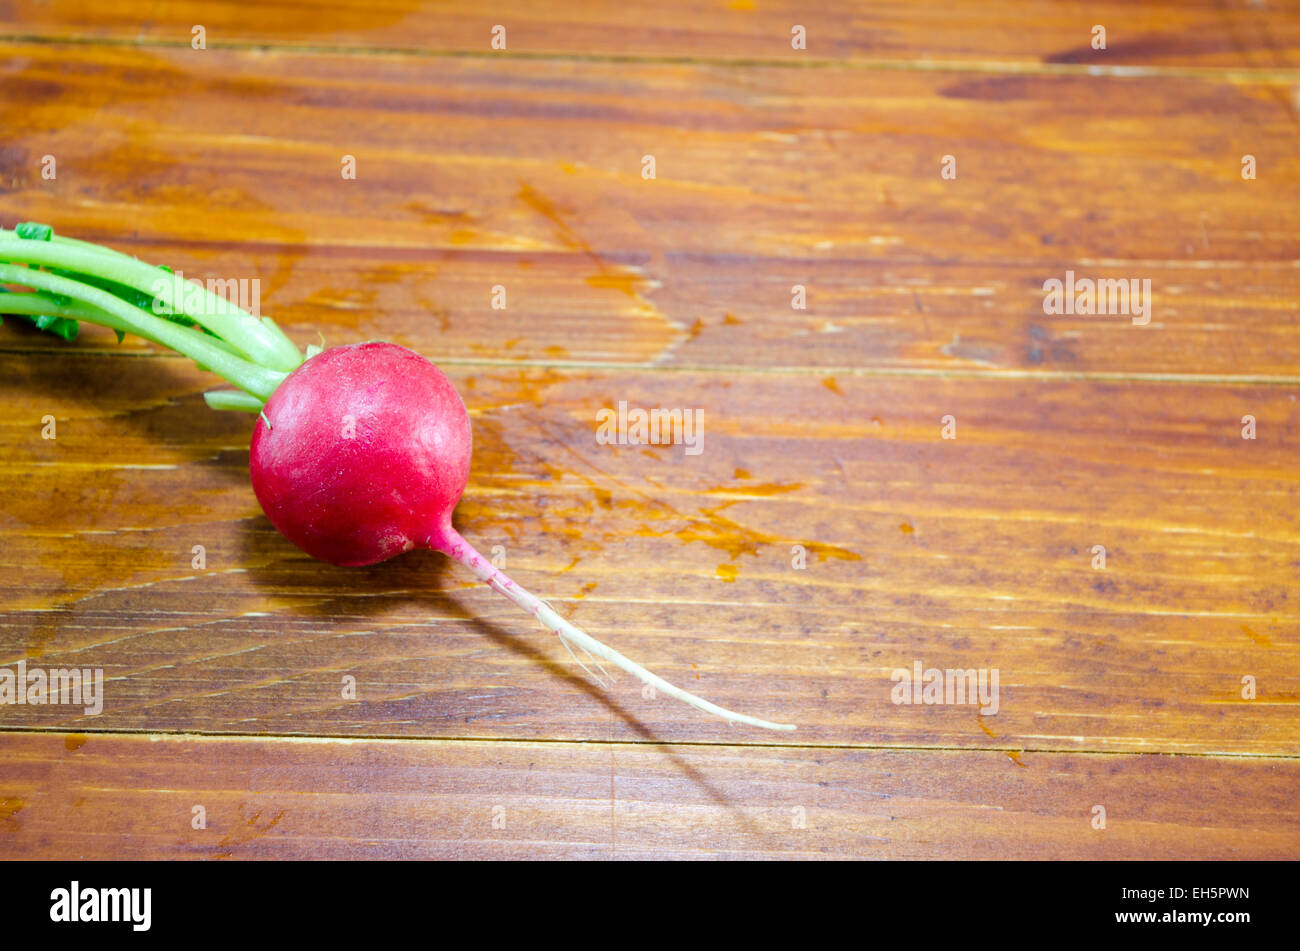 Fresh and moist radish on a wooden table Stock Photo